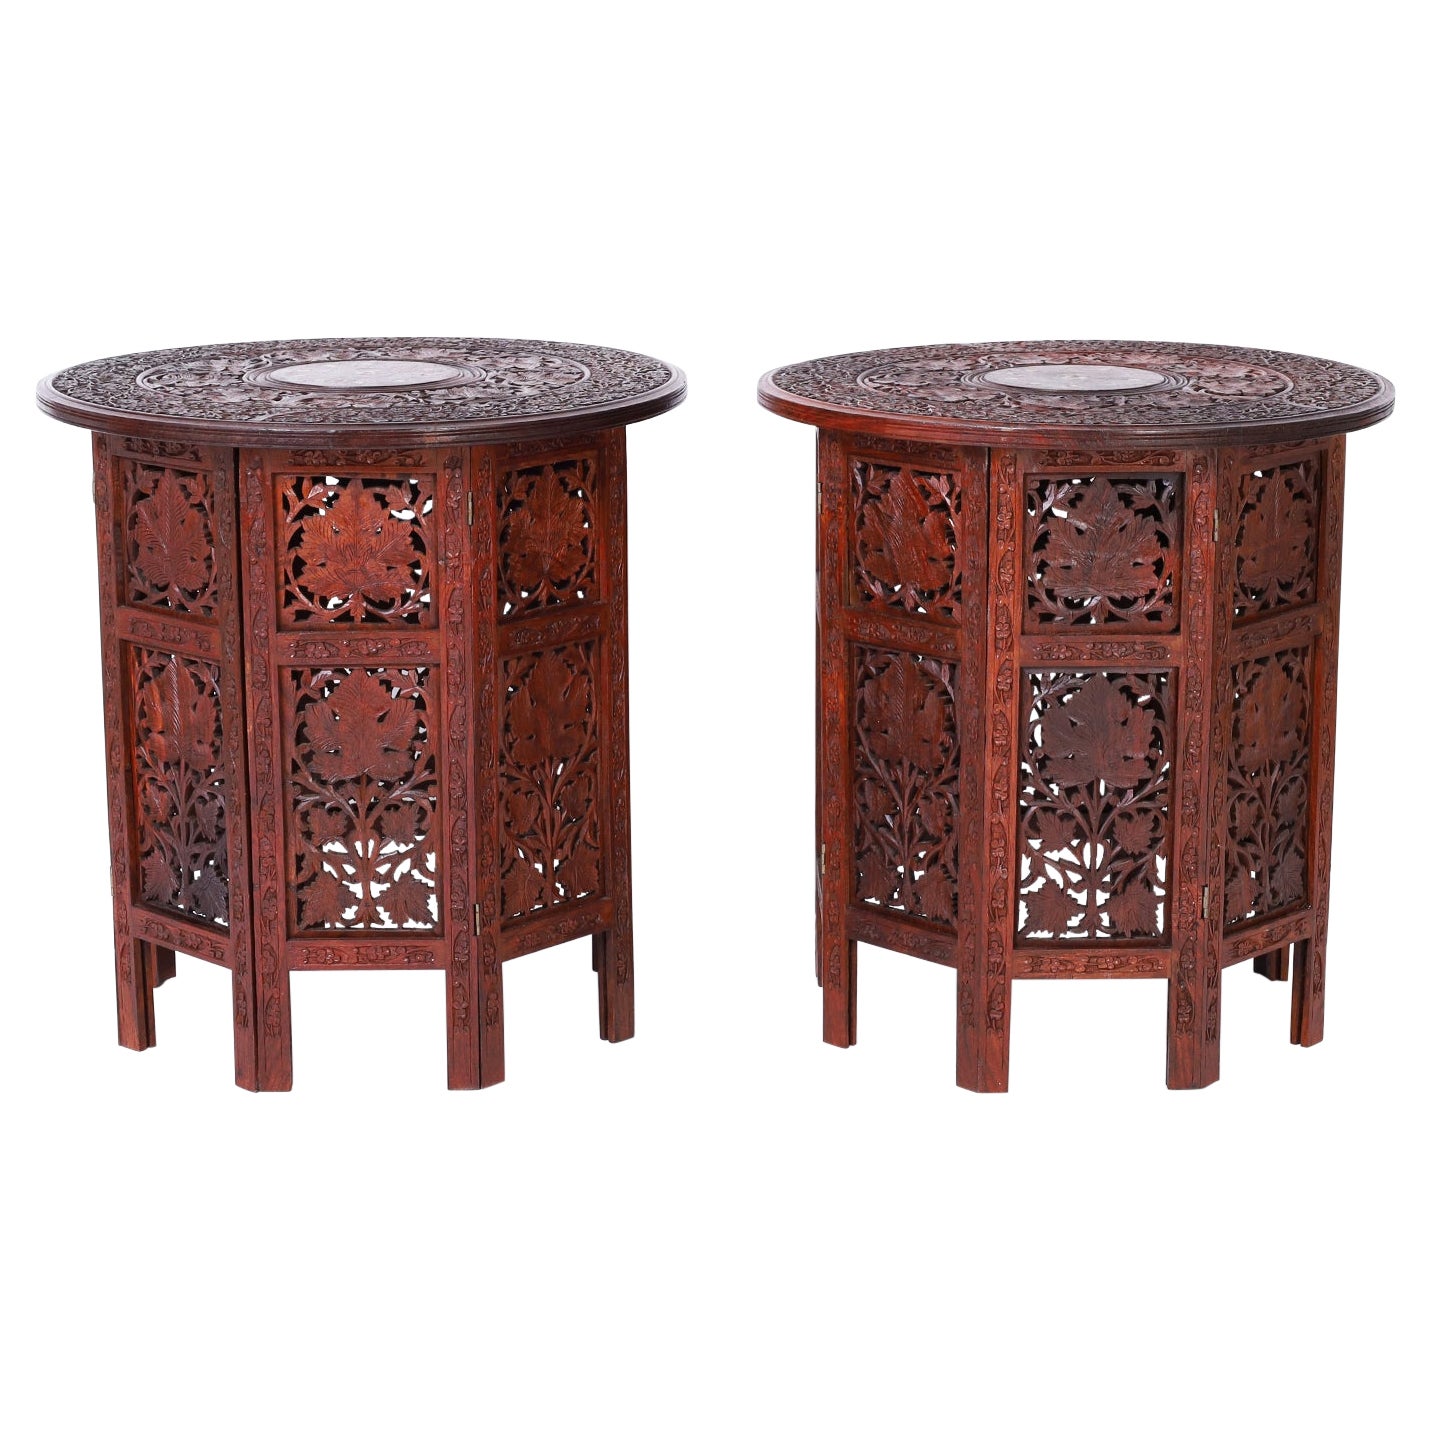 Pair of Antique Anglo Indian Carved Wood Stands or Tables